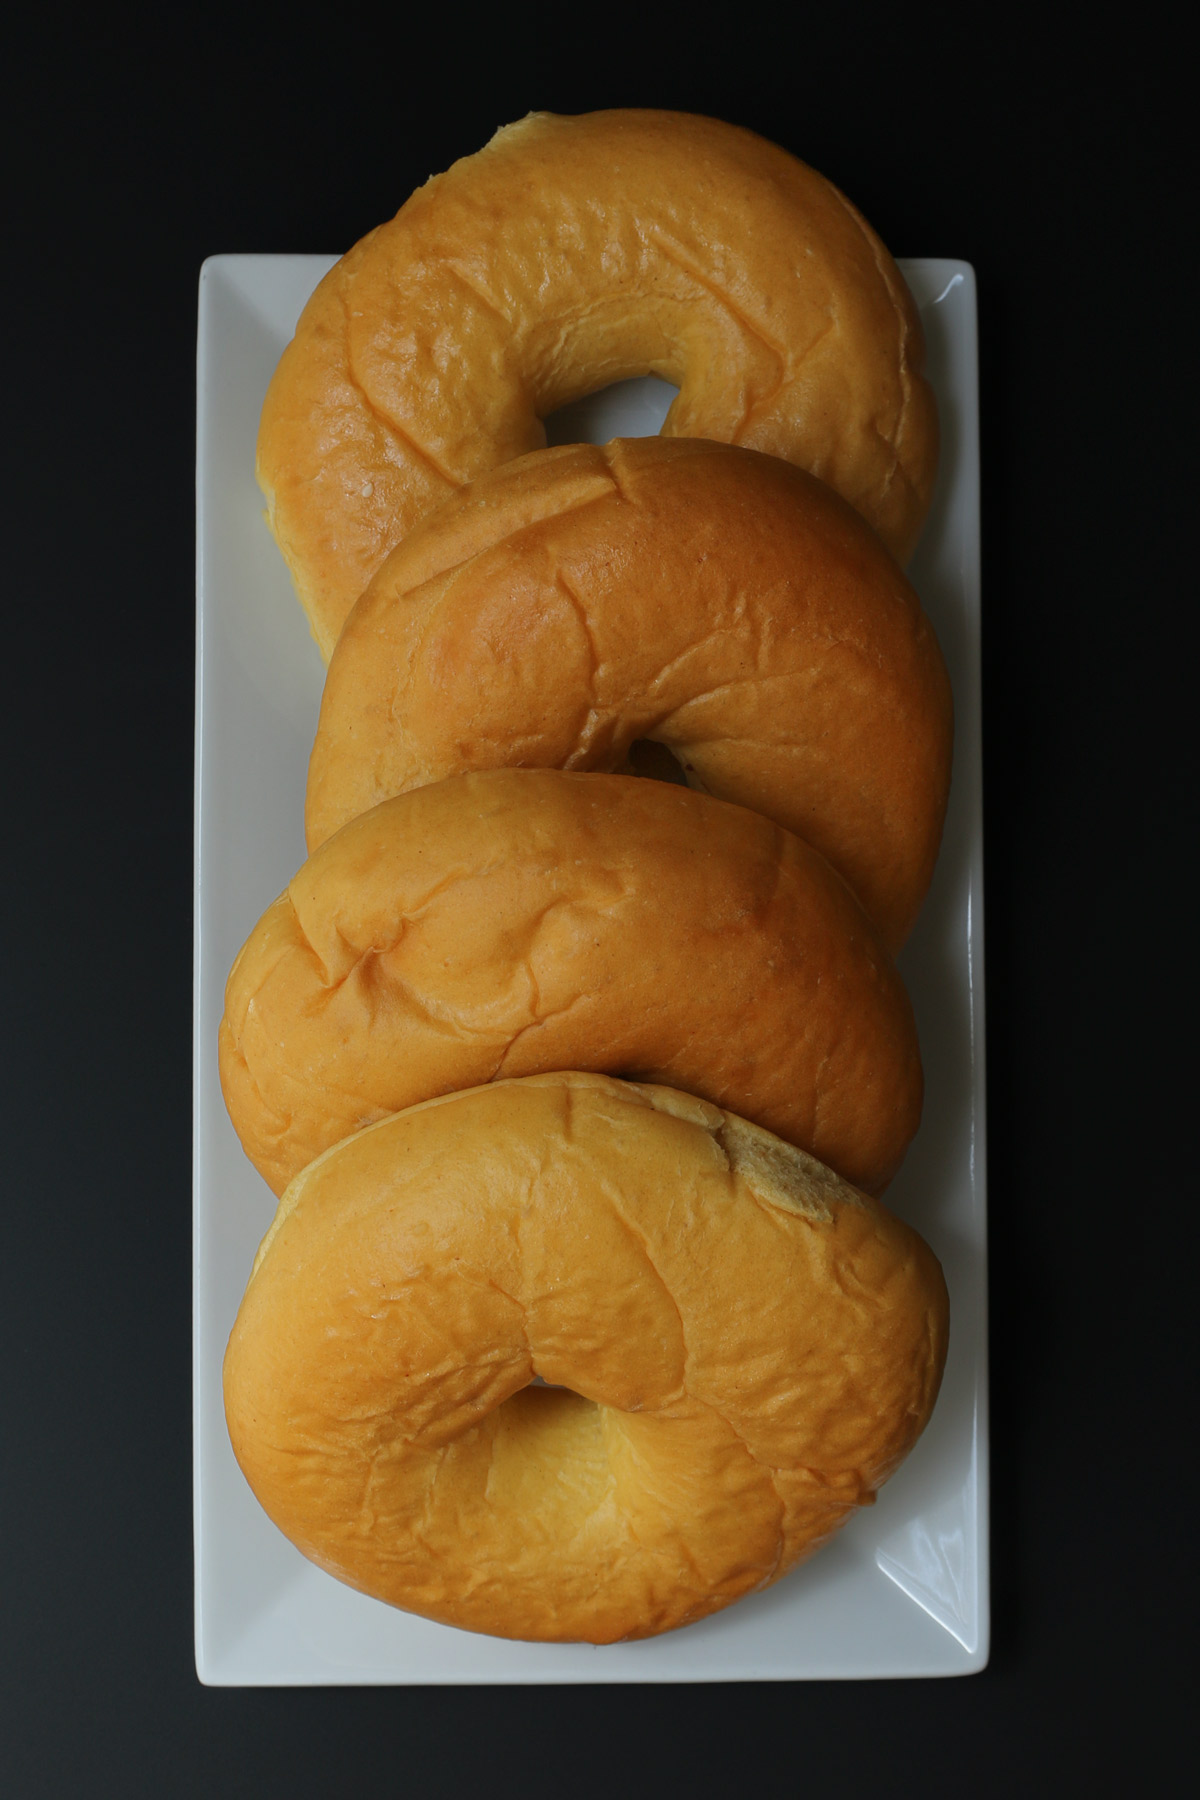 four bagels on a rectangular, white platter on a black table.